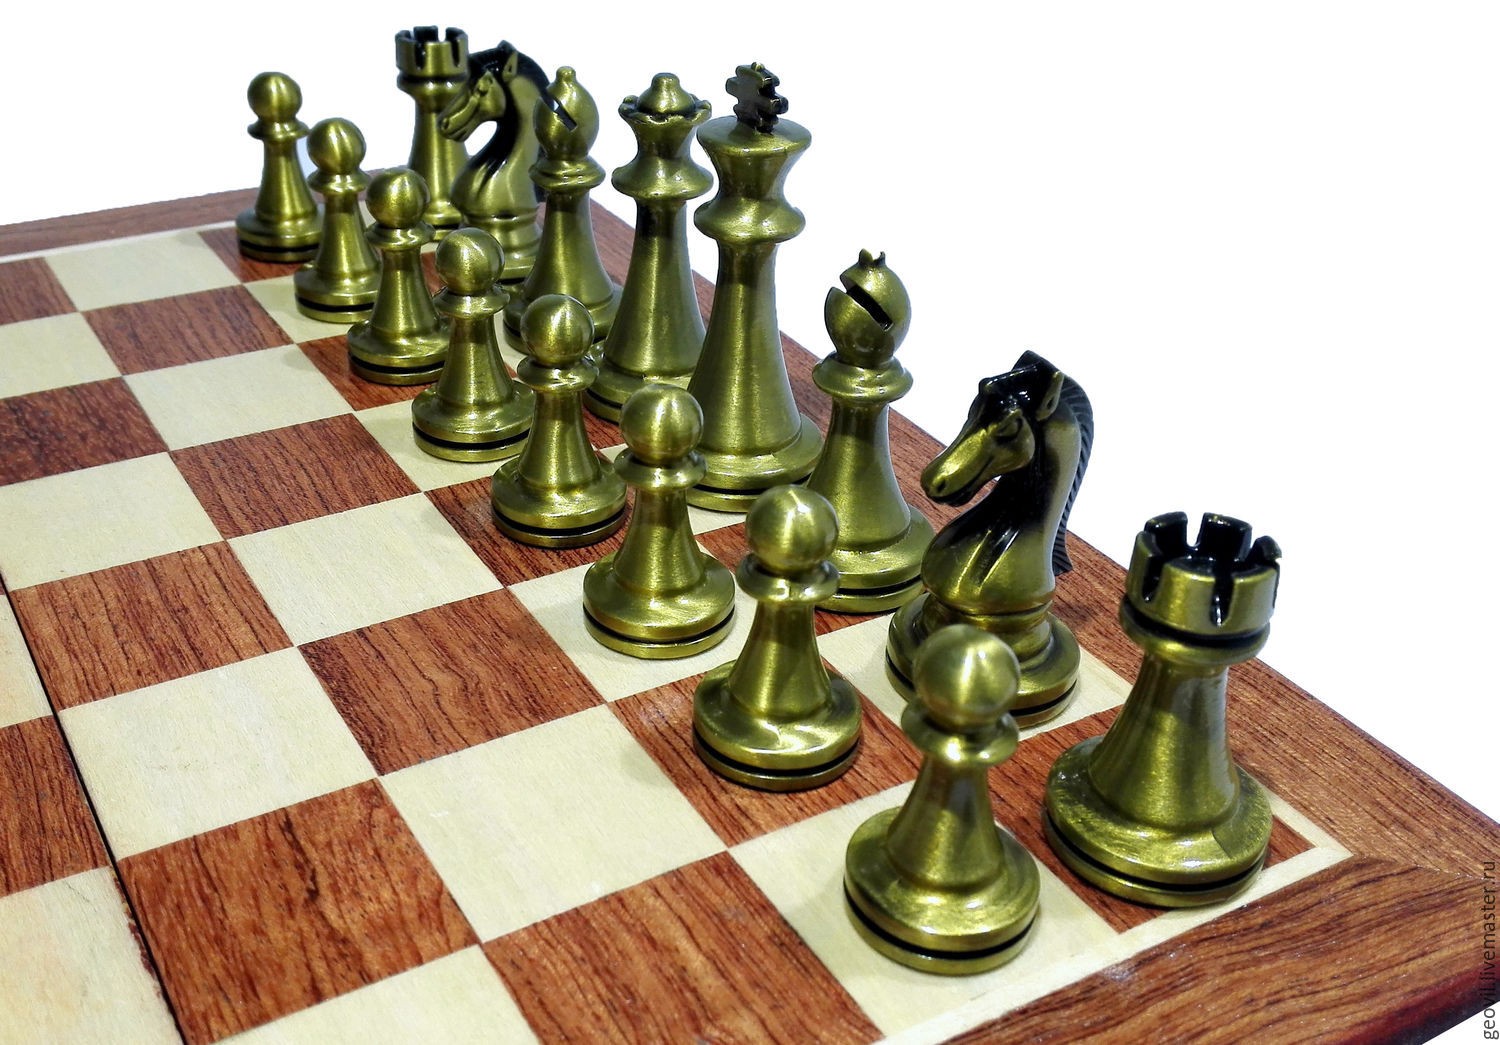 Papercraft Chess Chess Classic 30x30 Cm Wood Shape Metal – Shop Online On